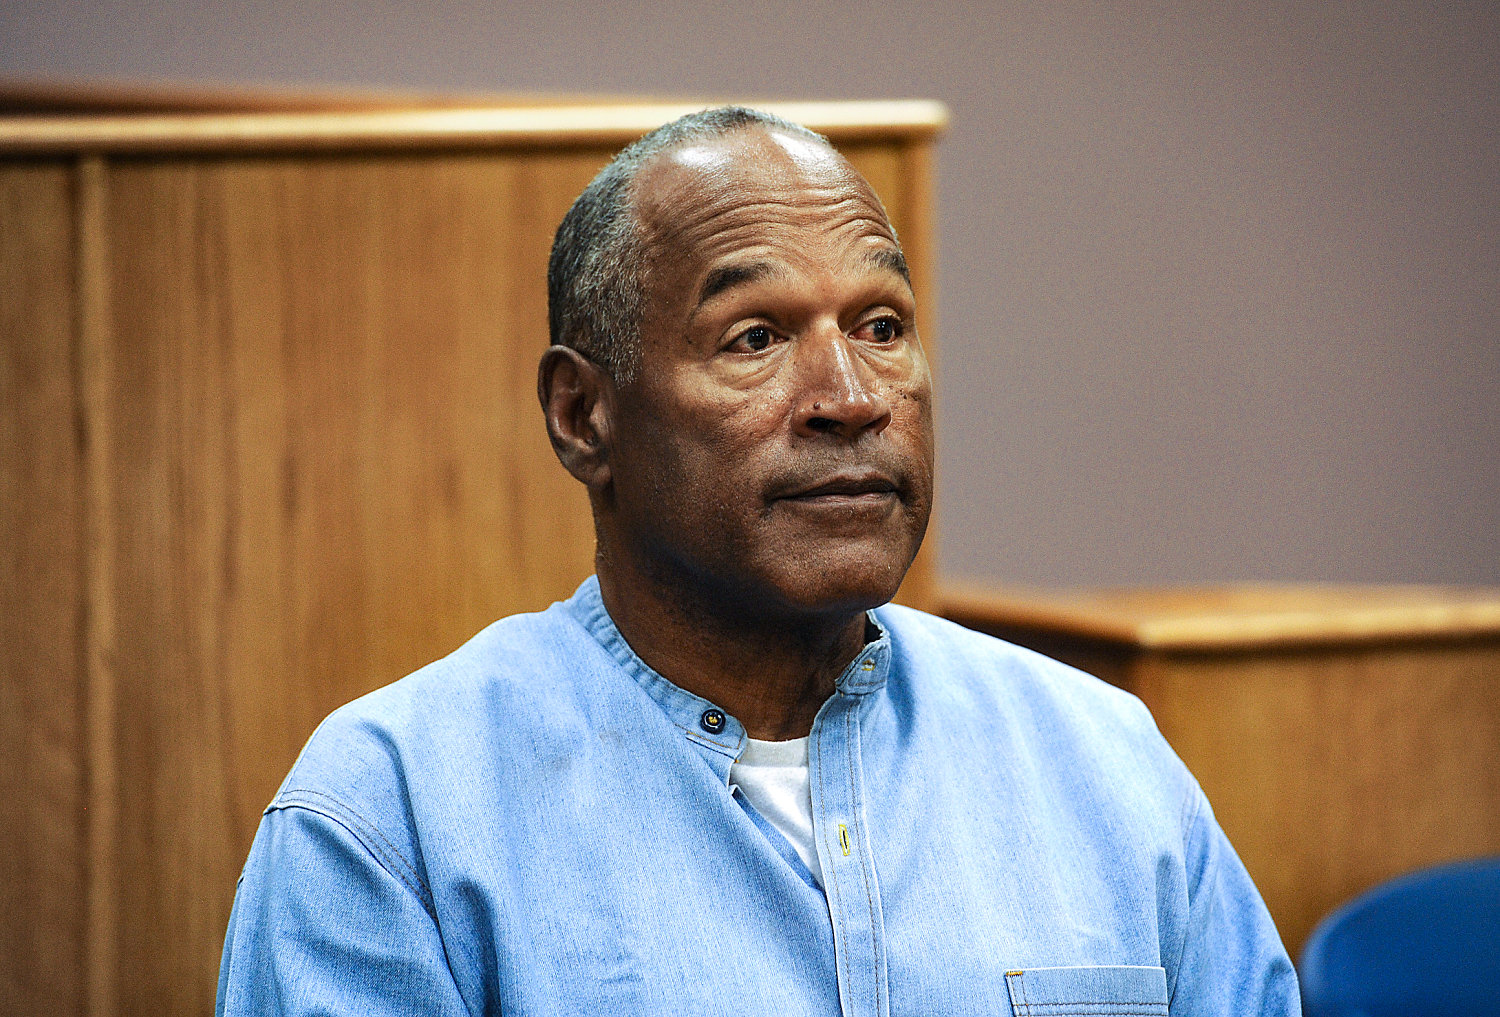 O.J. Simpson will be cremated; estate executor says 'hard no' to controversial ex-athlete’s brain being studied for CTE